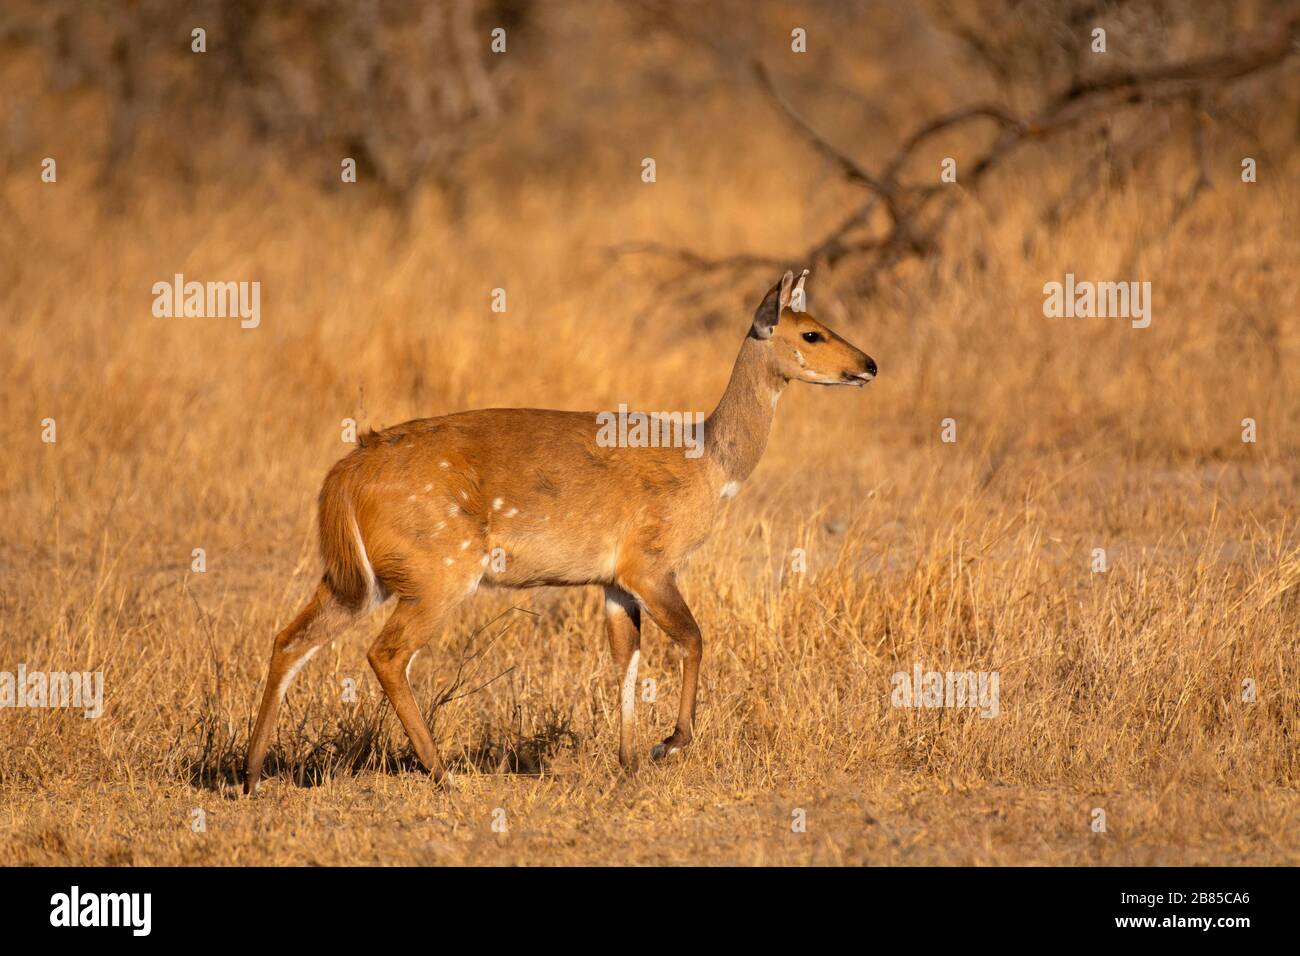 Common duiker, also known as the grey or bush duiker, Sylvicapra grimmia, Kruger National Park, South Africa Stock Photo